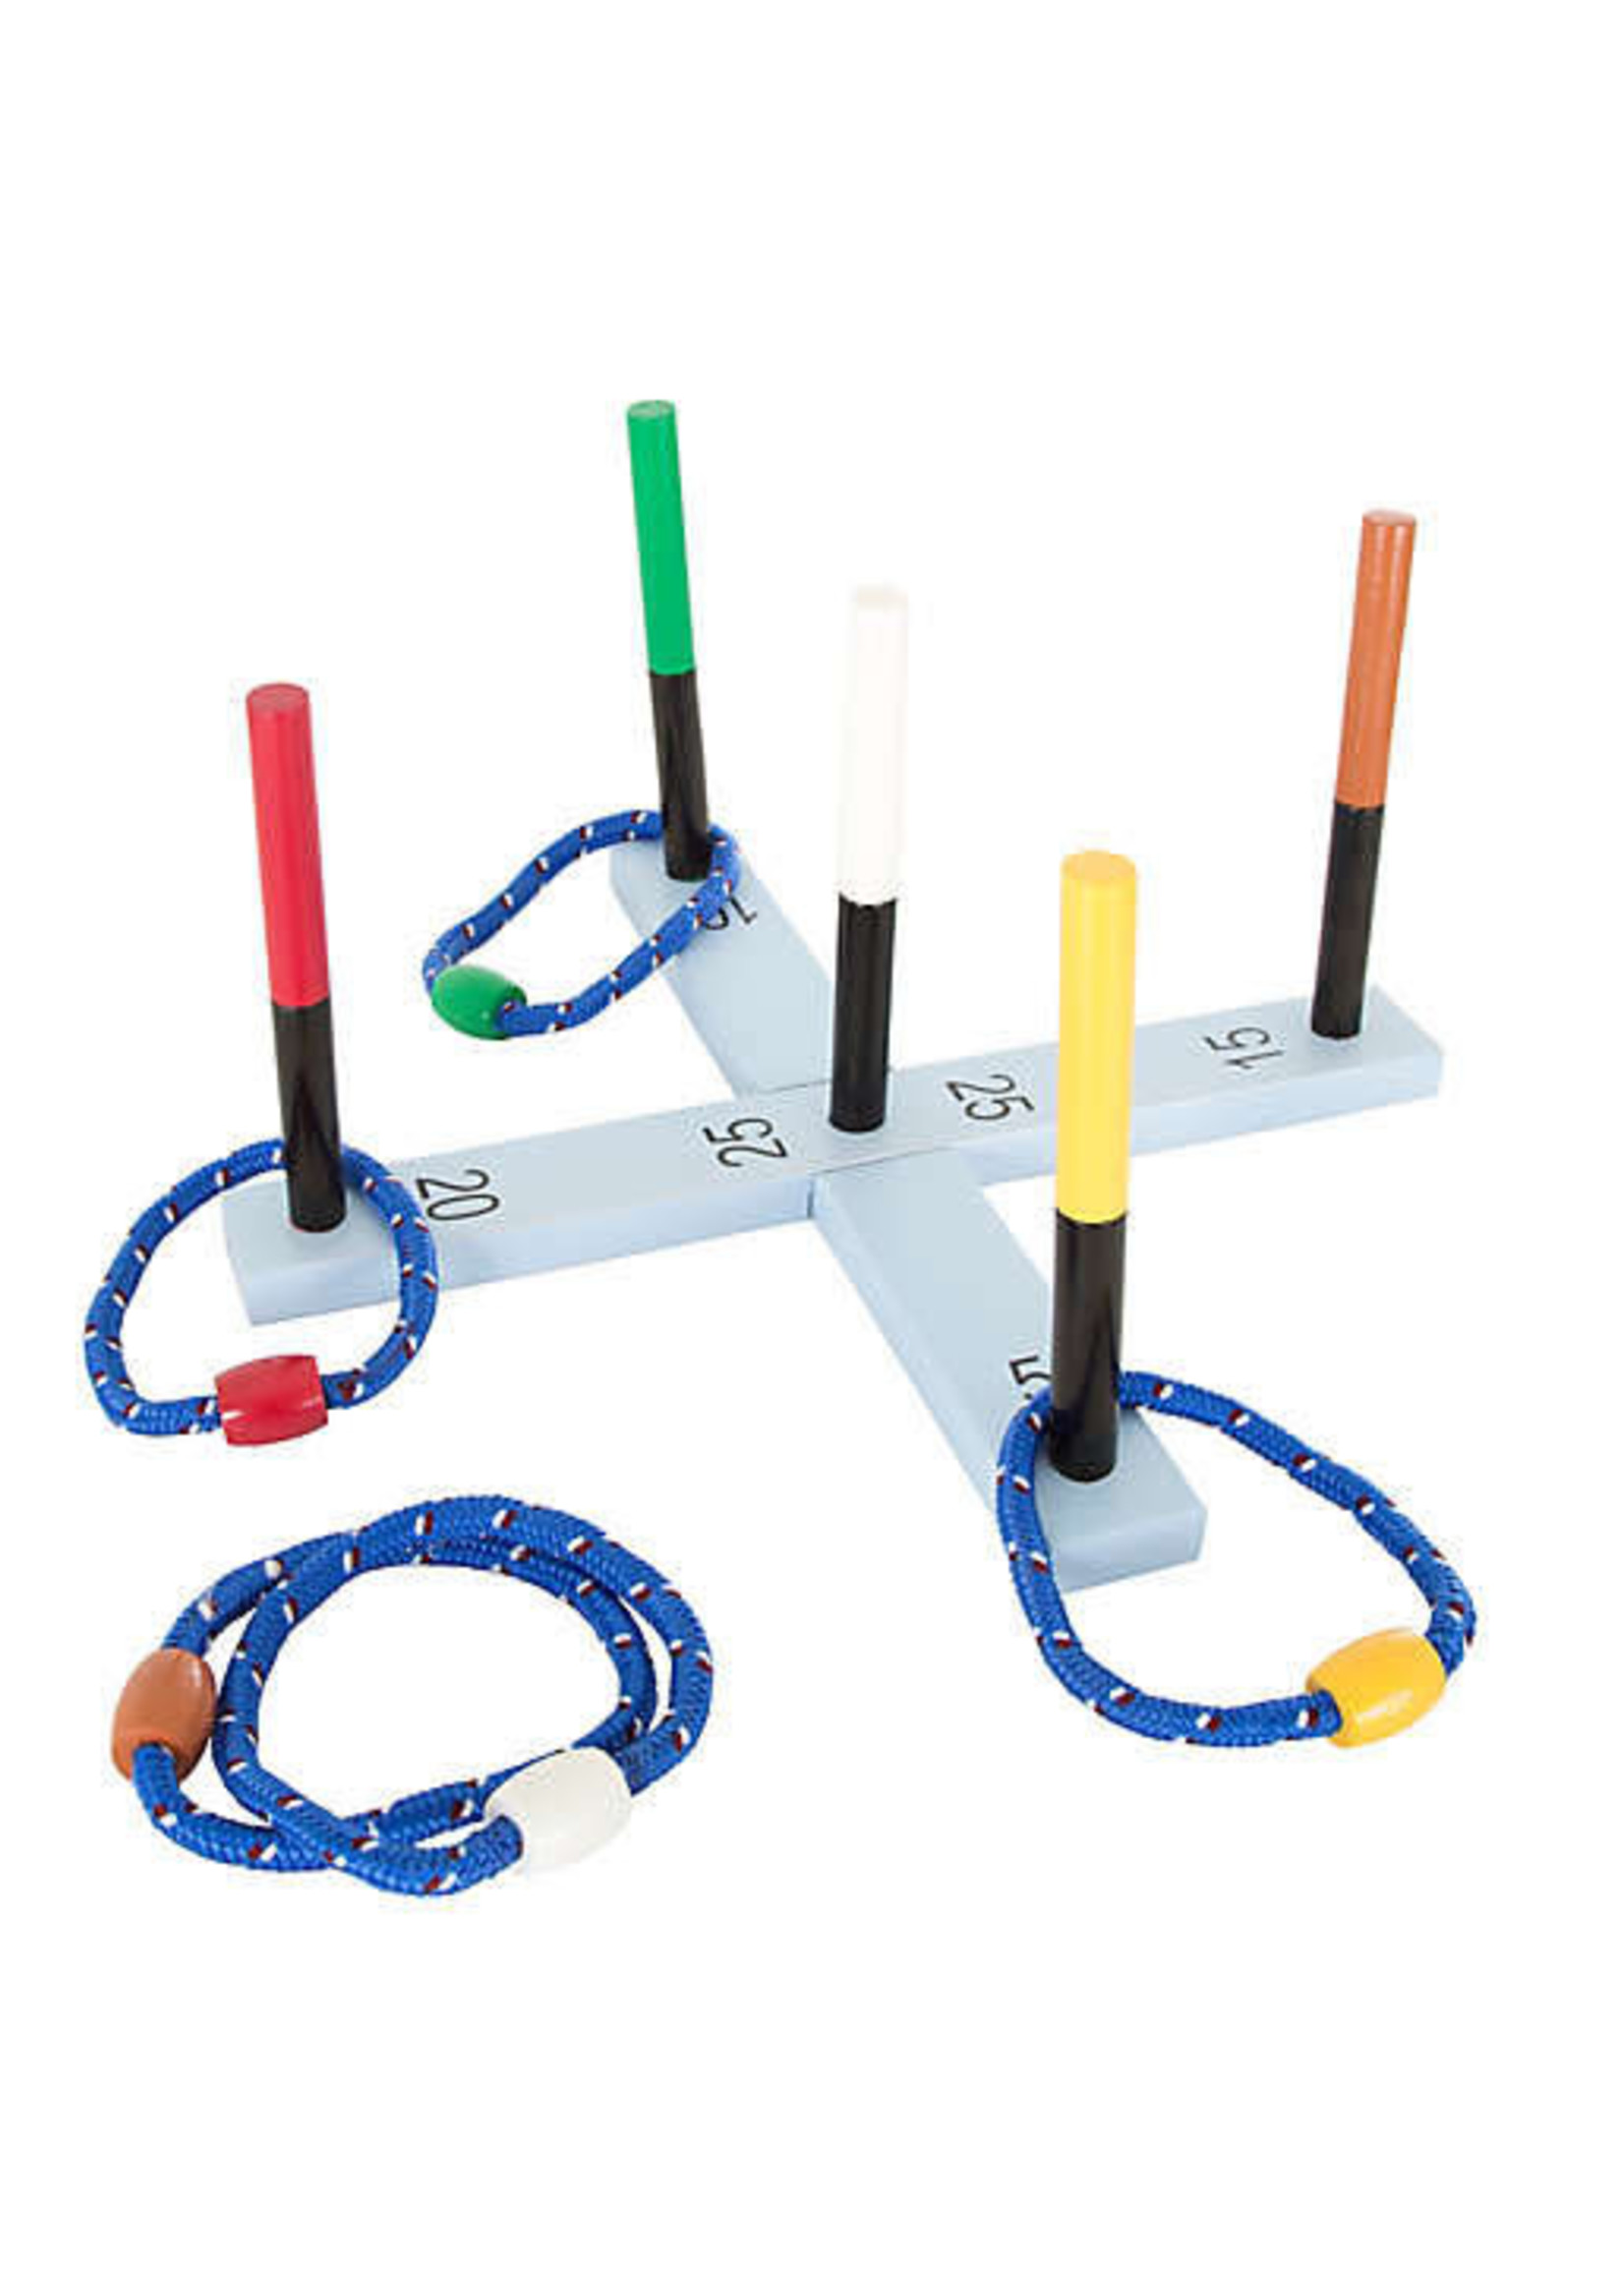 TOSS GAME HEY! PLAY! Ring Toss